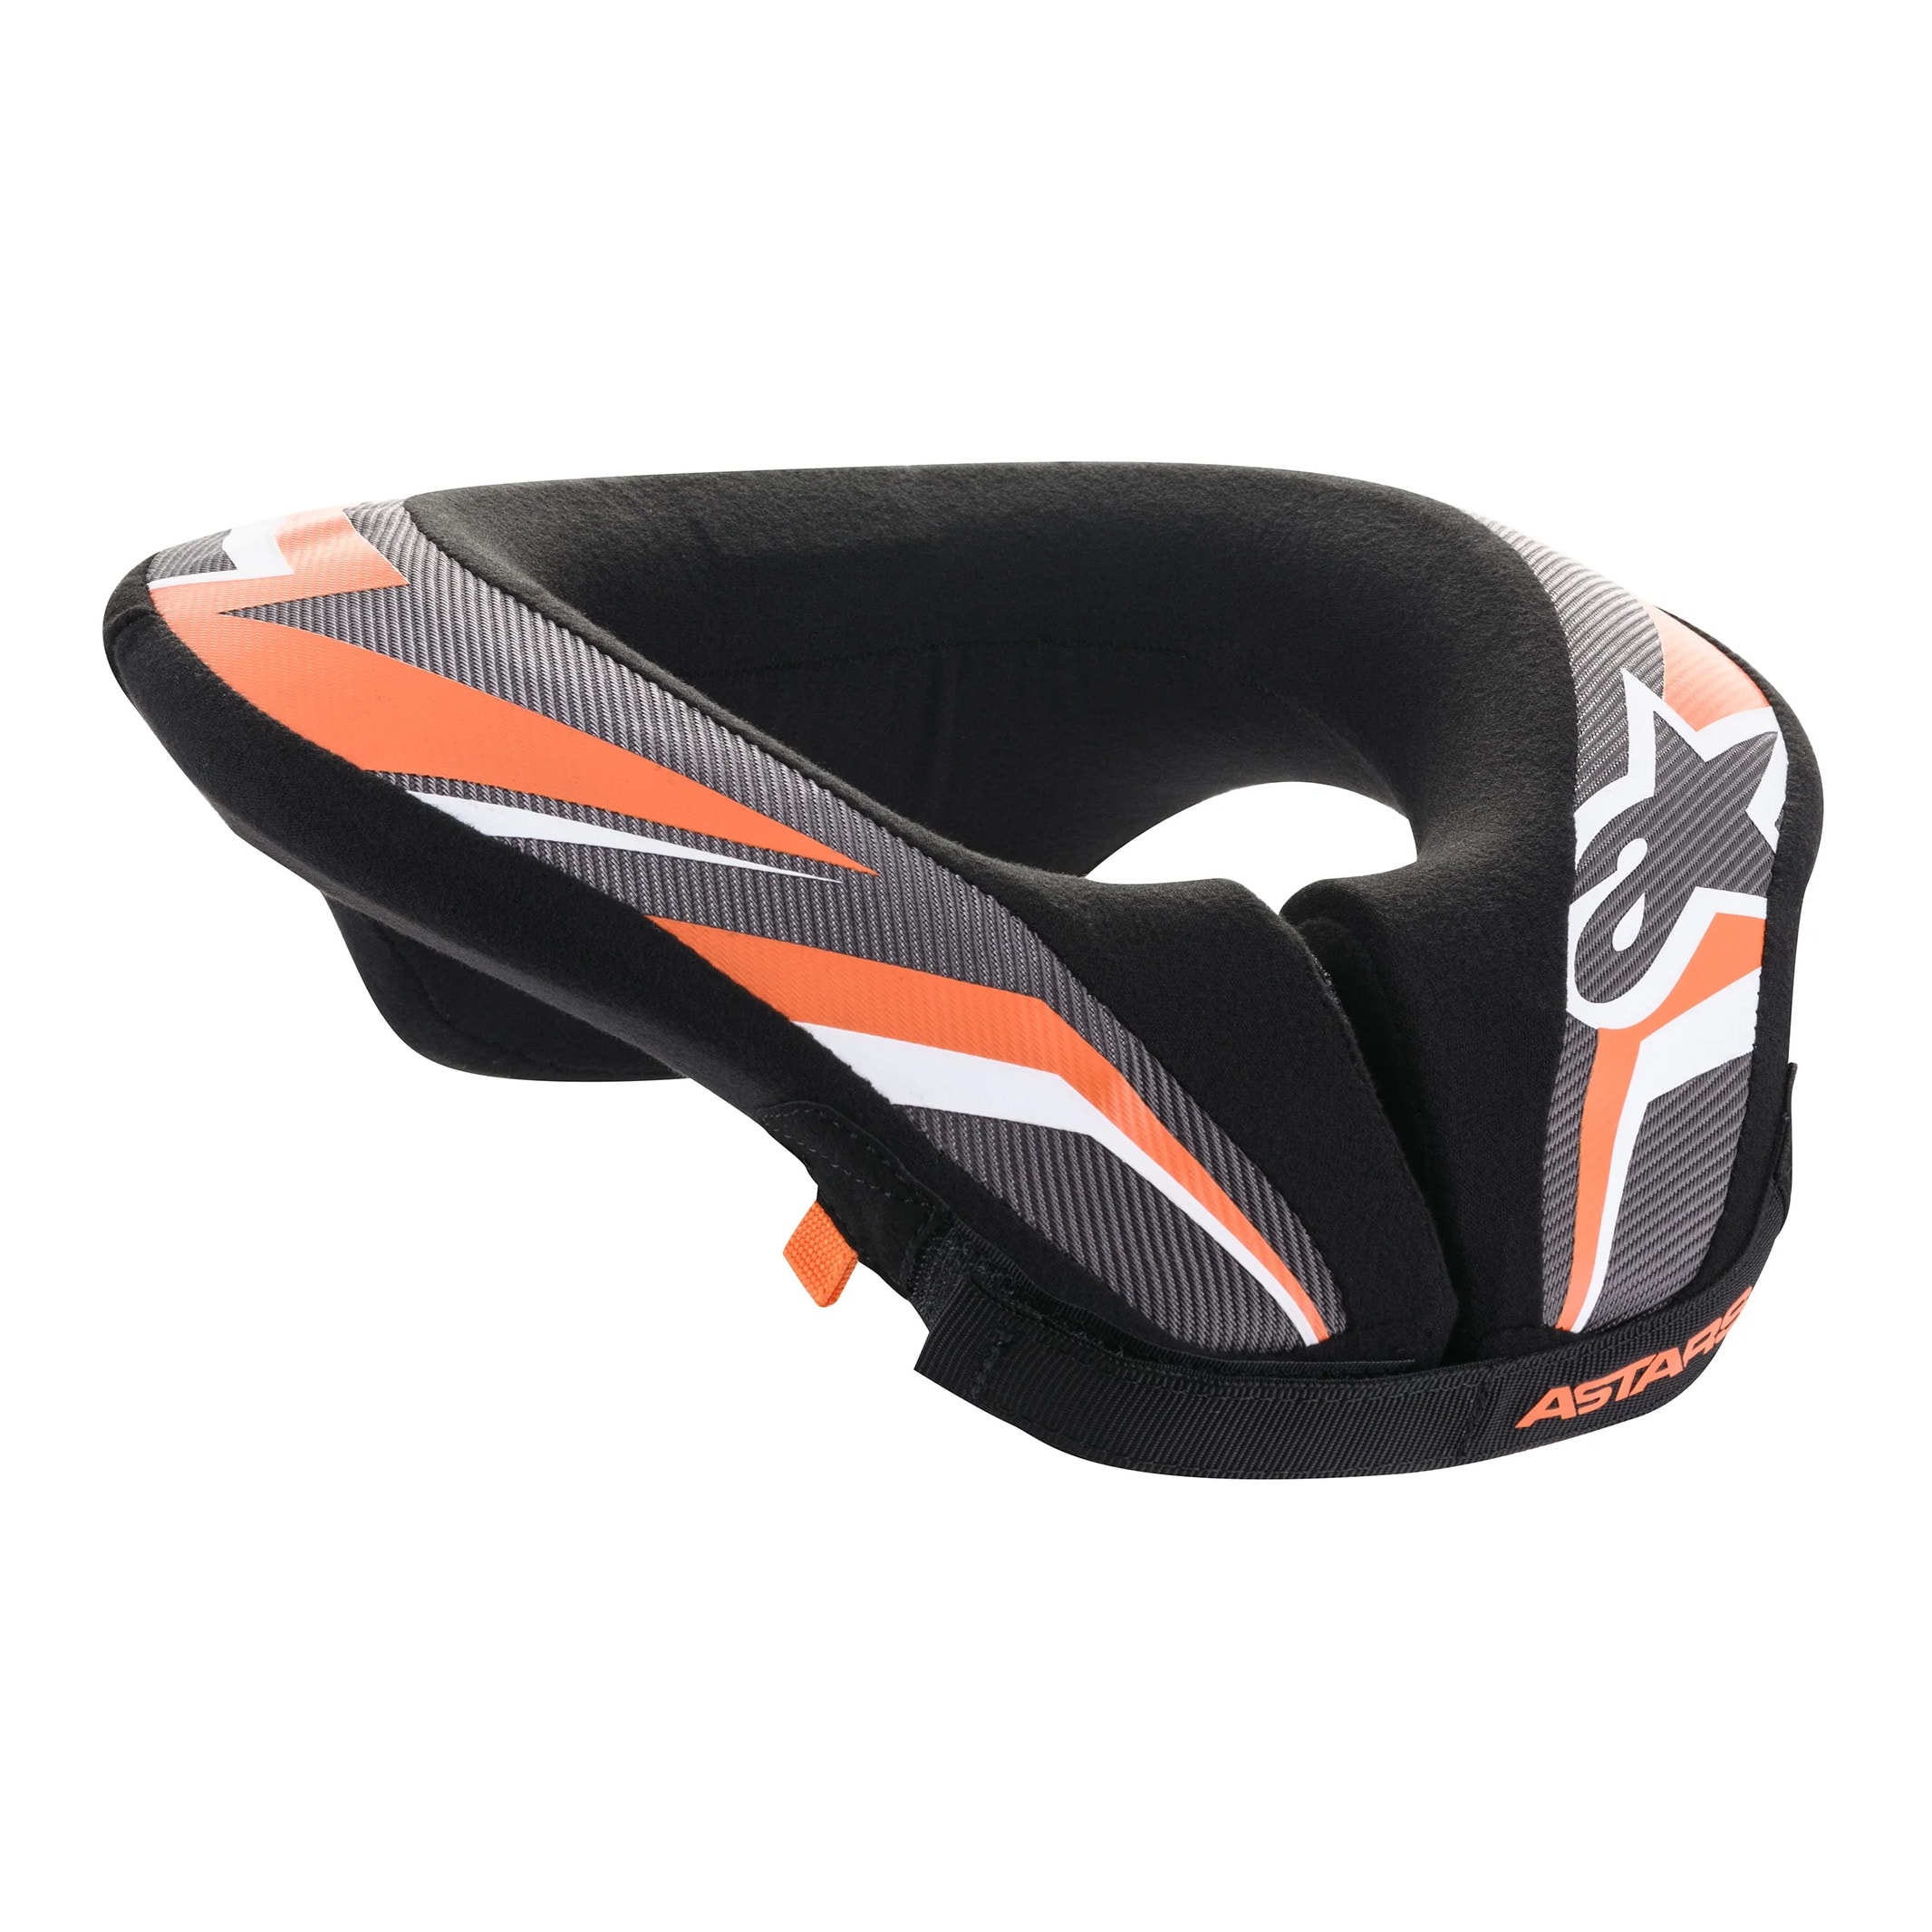 Neckprotection Sequence Youth Black/Orange